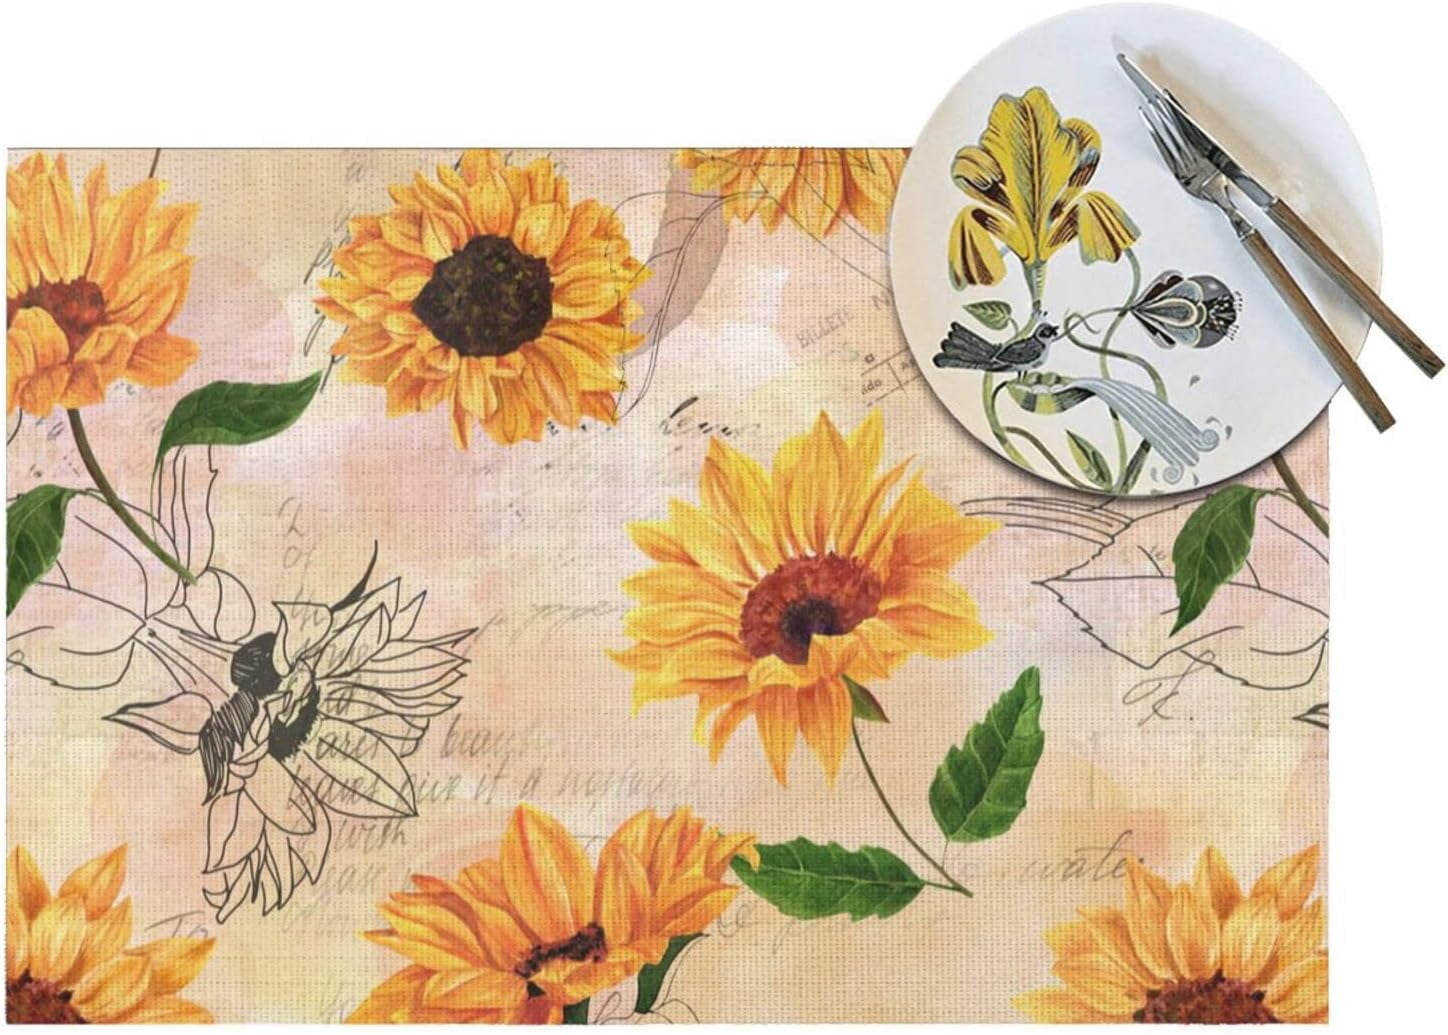 Farm Family Sunflower Cattle Sunflower on Old Car Placemats Set of 4 Heat  Resistant Non-Slip Place Mats for Dining Table, Washable Durable PVC Woven